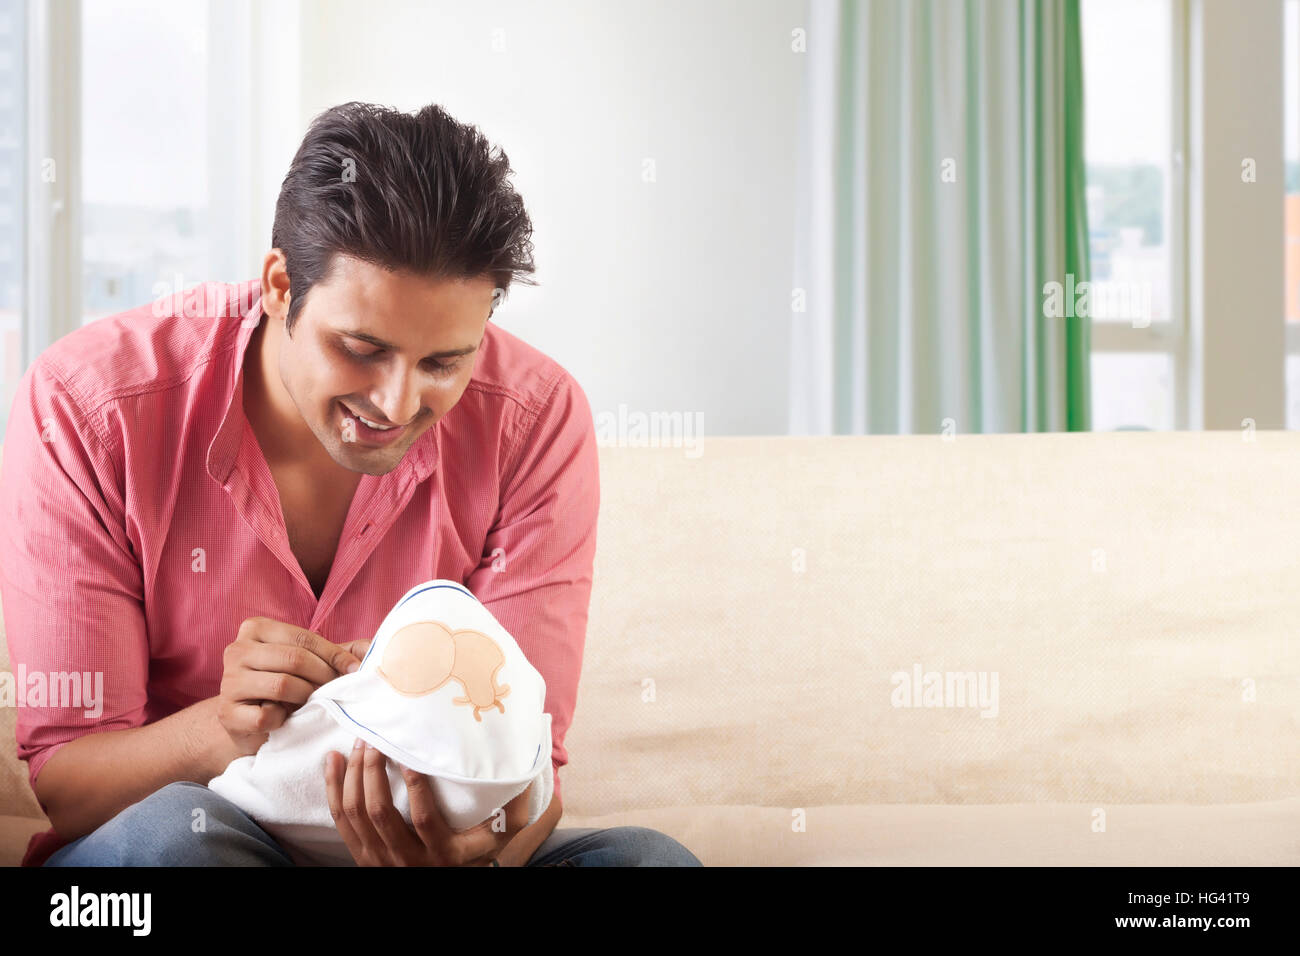 Smiling father Playing with newborn baby Banque D'Images